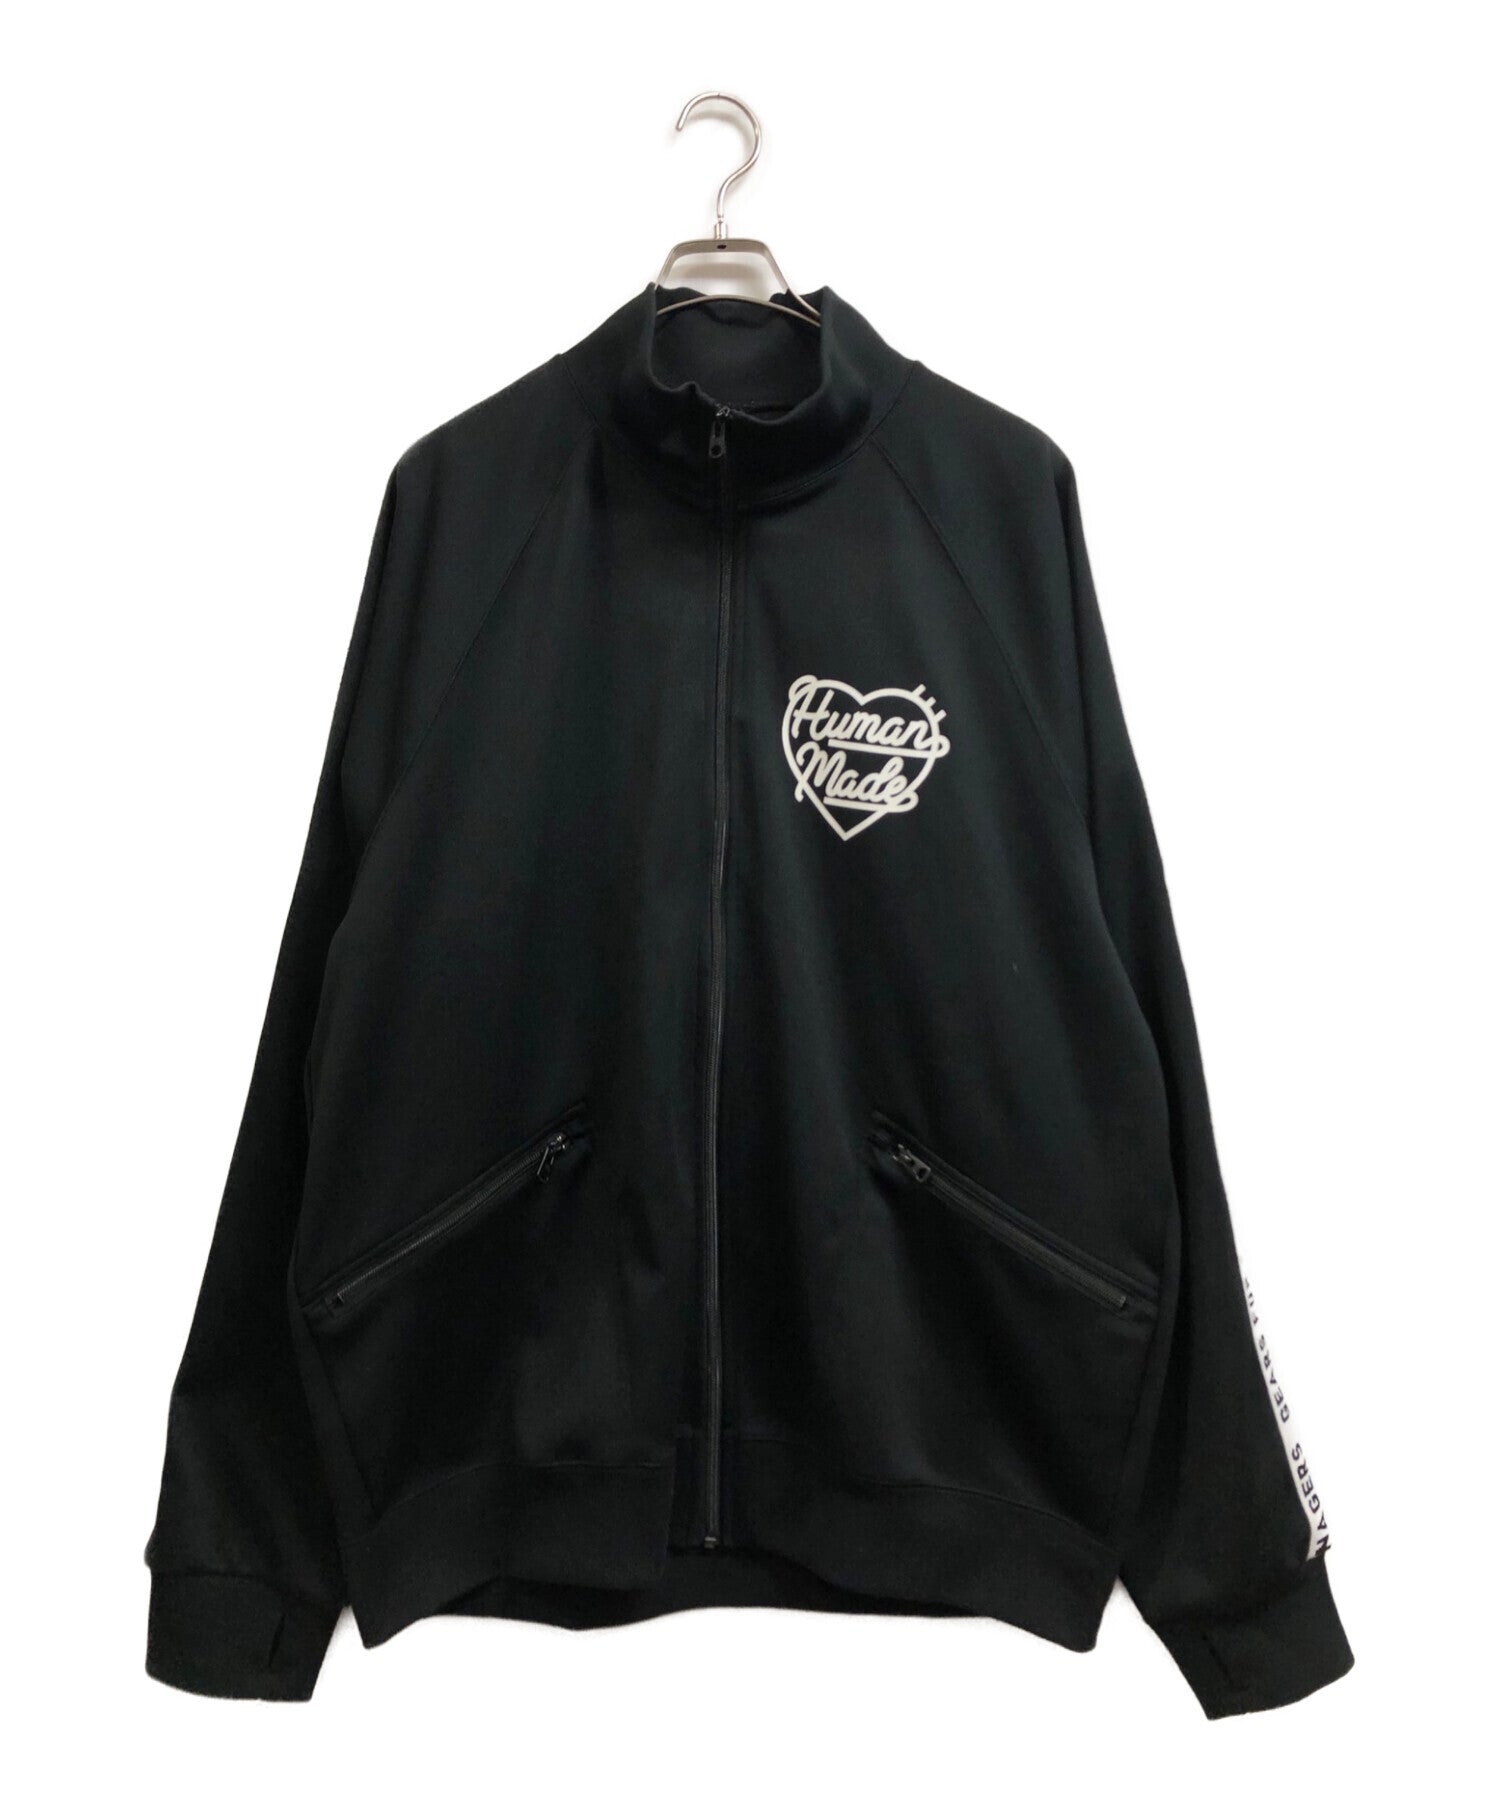 Archive Factory Human Made Track Jacket